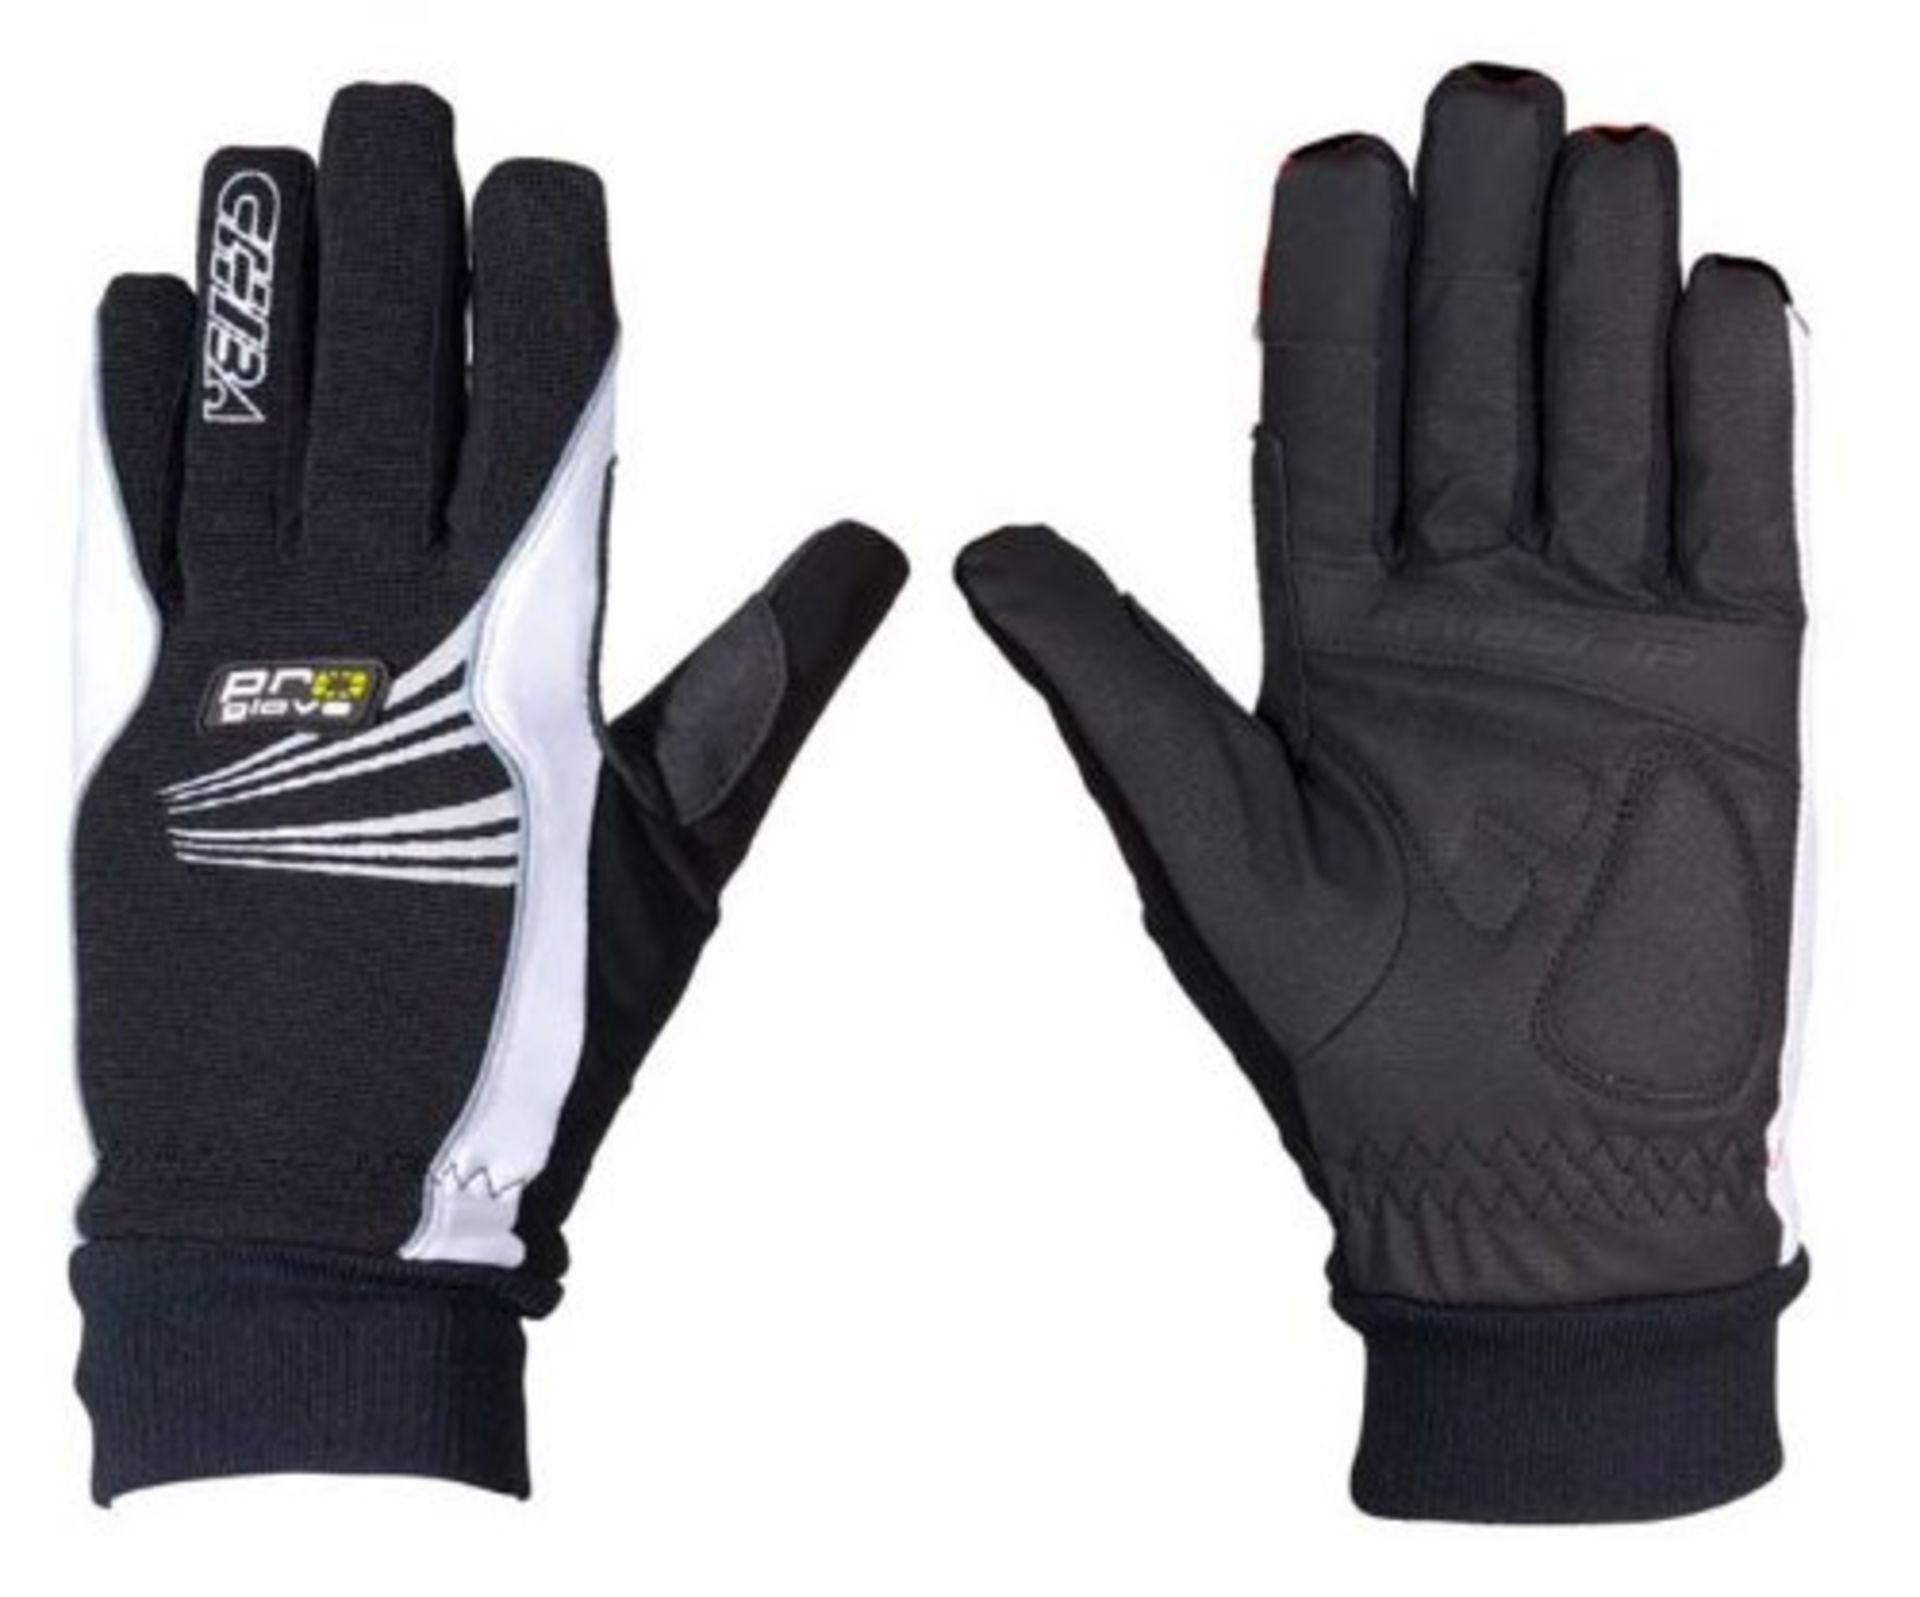 7 x Pairs of Boys & Girls Cycling Gloves | Total RRP £43.89 | See Description for Details - Image 2 of 4